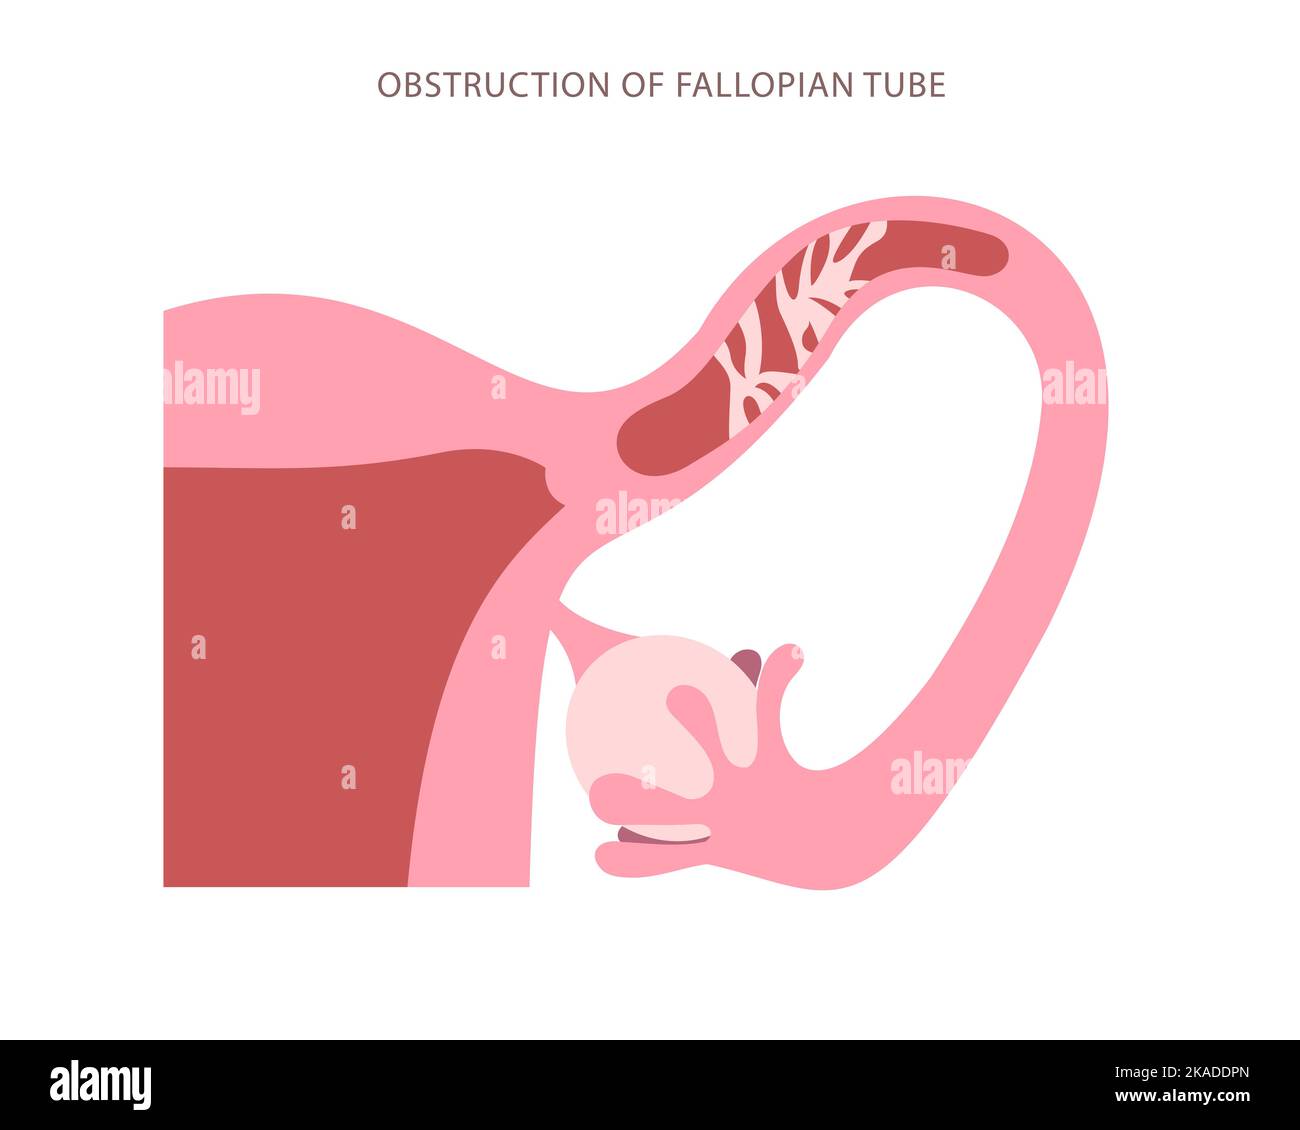 Flat chart of Fallopian tube obstructed. Blockage of womb tube high magnification scheme Stock Vector